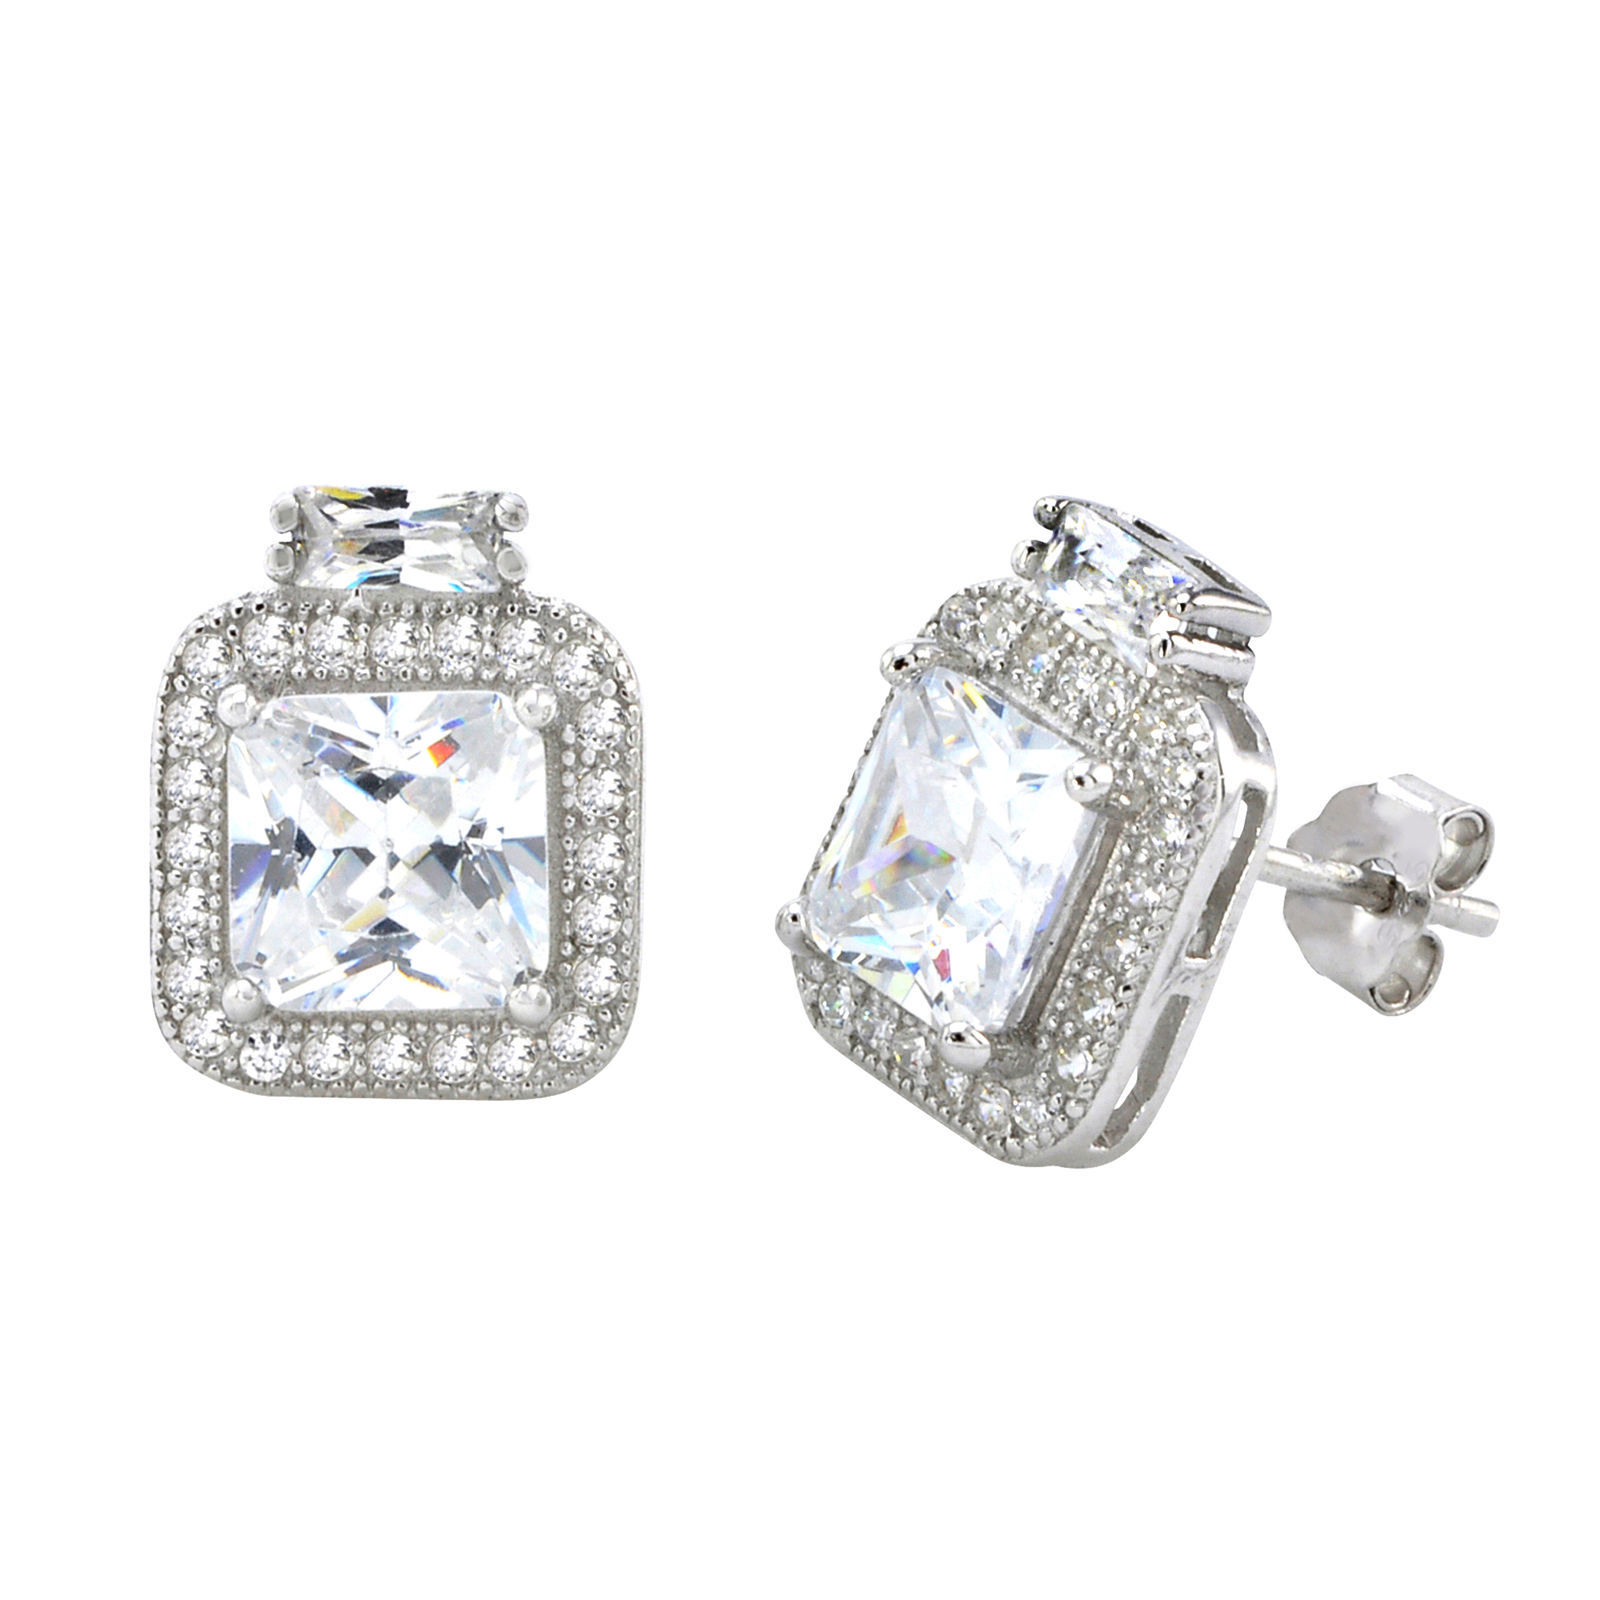 Sterling Silver Square Halo Cubic Zirconia Stud Earrings Micropave 12mm x 10mm - $21.32